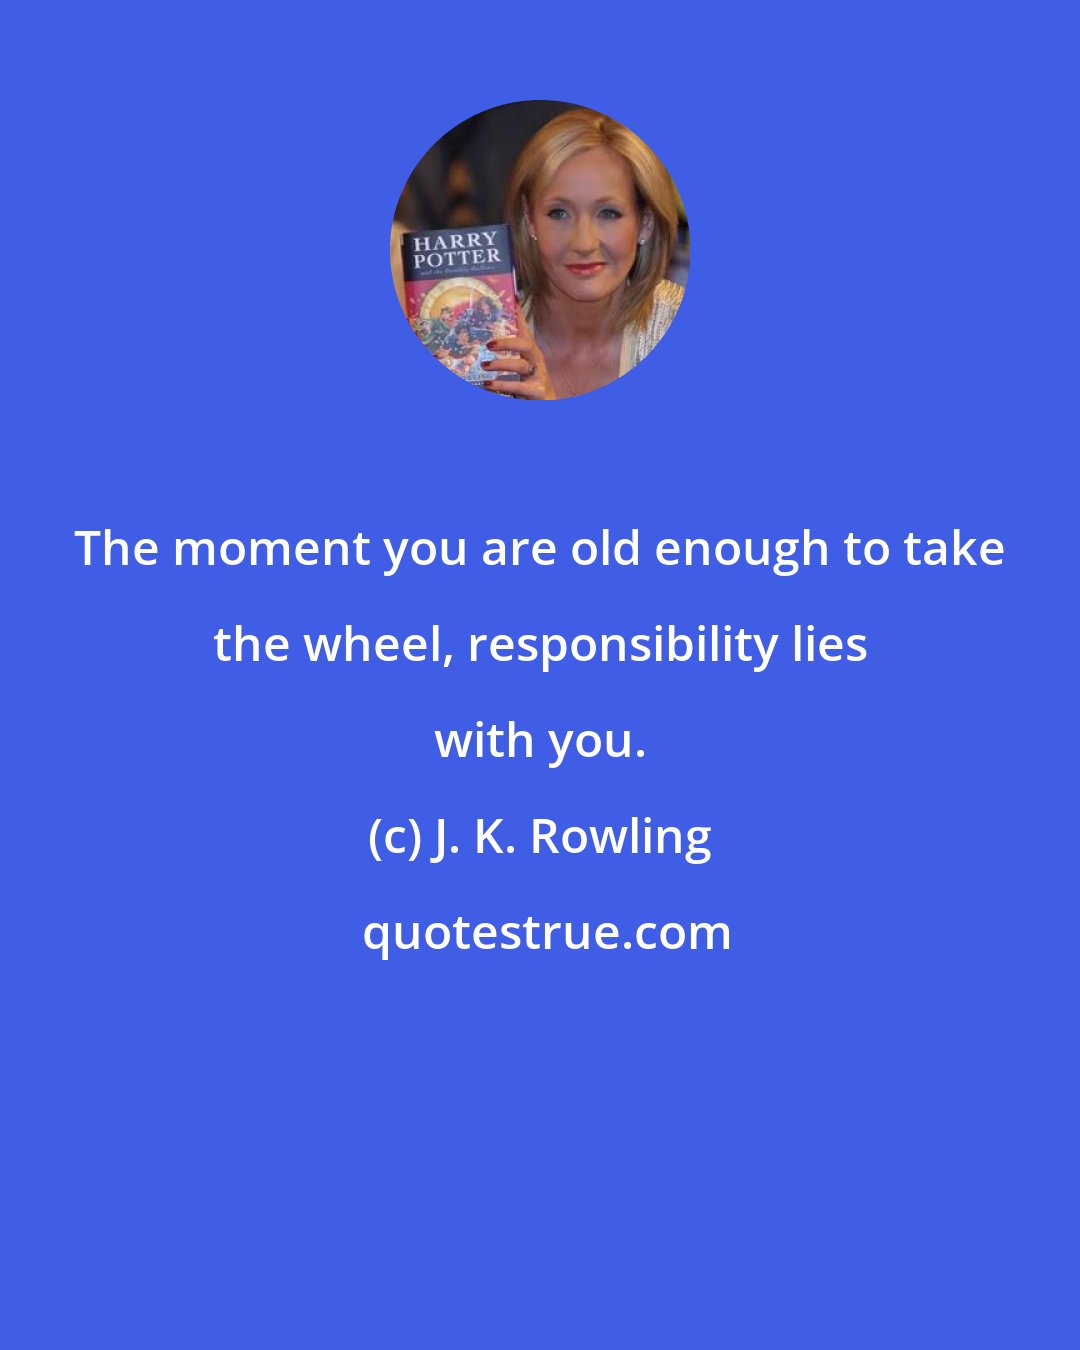 J. K. Rowling: The moment you are old enough to take the wheel, responsibility lies with you.